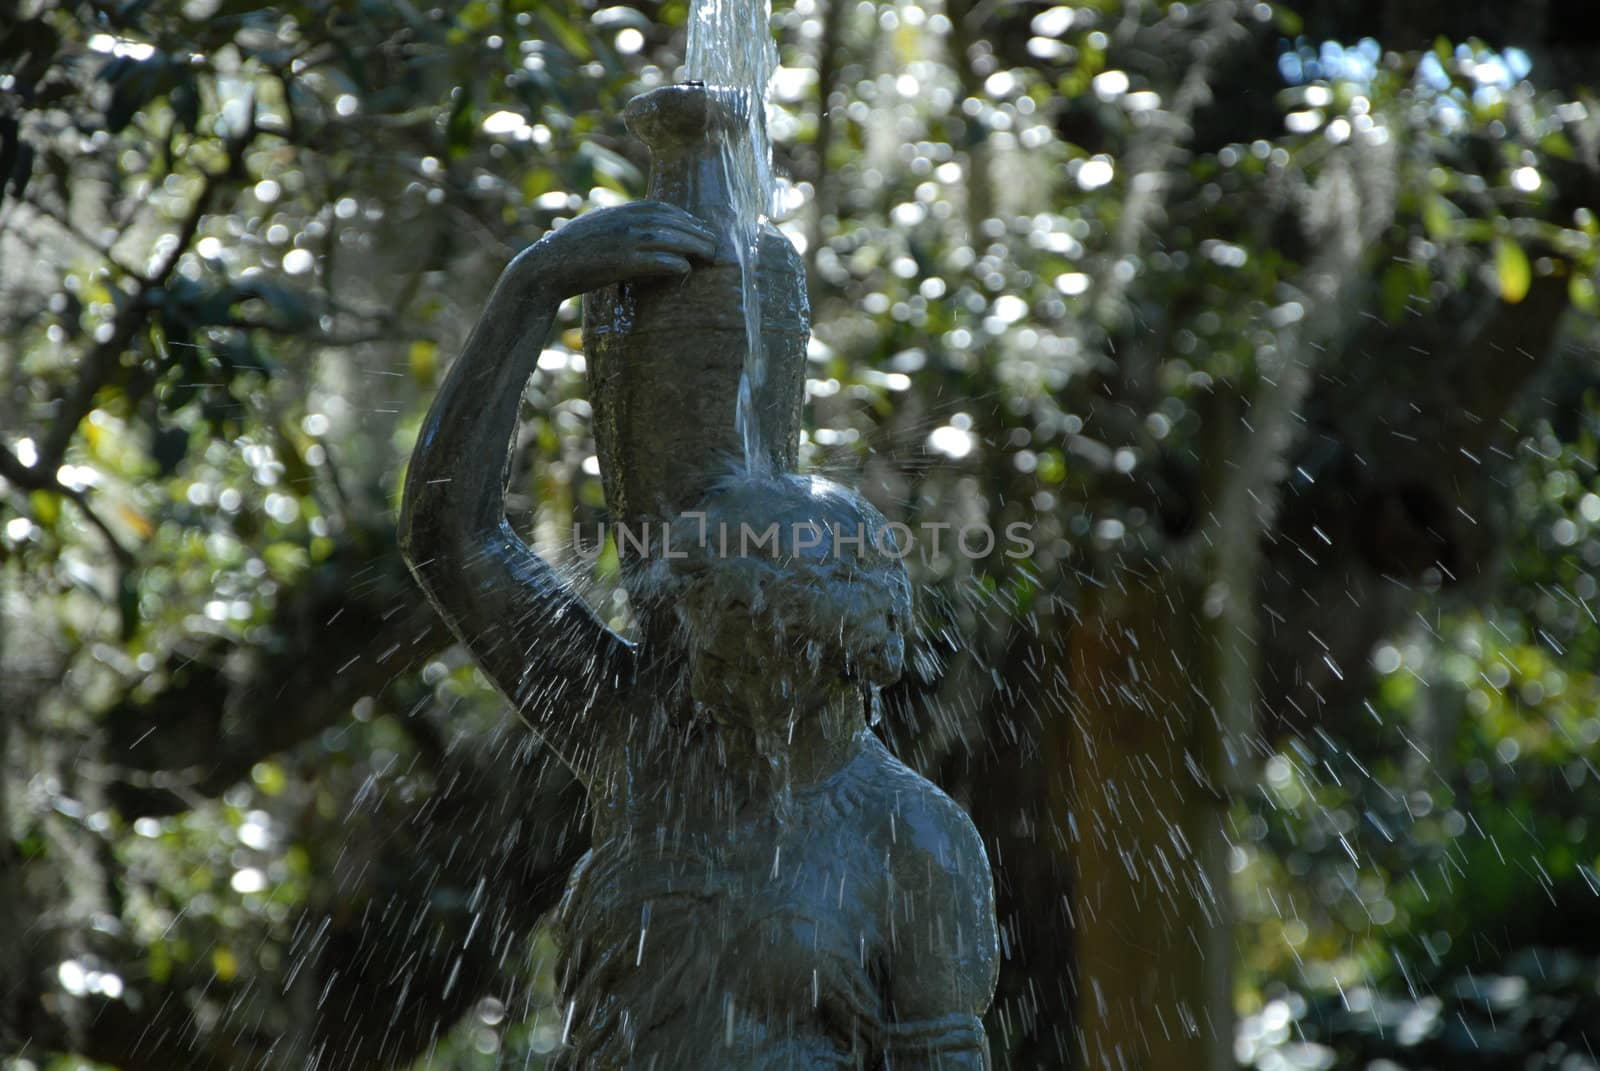 Water flowing over a statue in a European style park